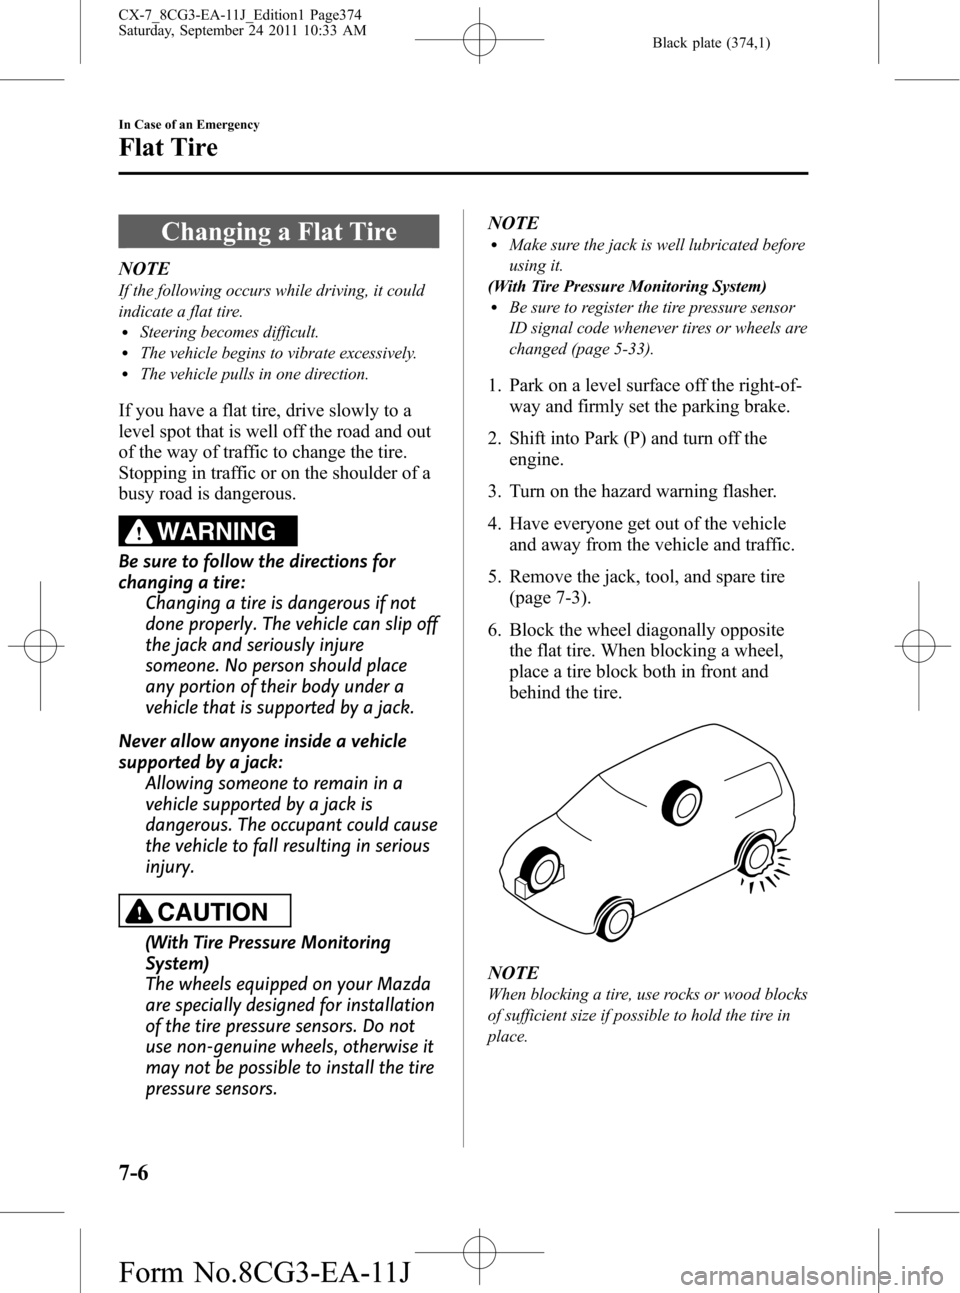 MAZDA MODEL CX-7 2012  Owners Manual (in English) Black plate (374,1)
Changing a Flat Tire
NOTE
If the following occurs while driving, it could
indicate a flat tire.
lSteering becomes difficult.lThe vehicle begins to vibrate excessively.lThe vehicle 